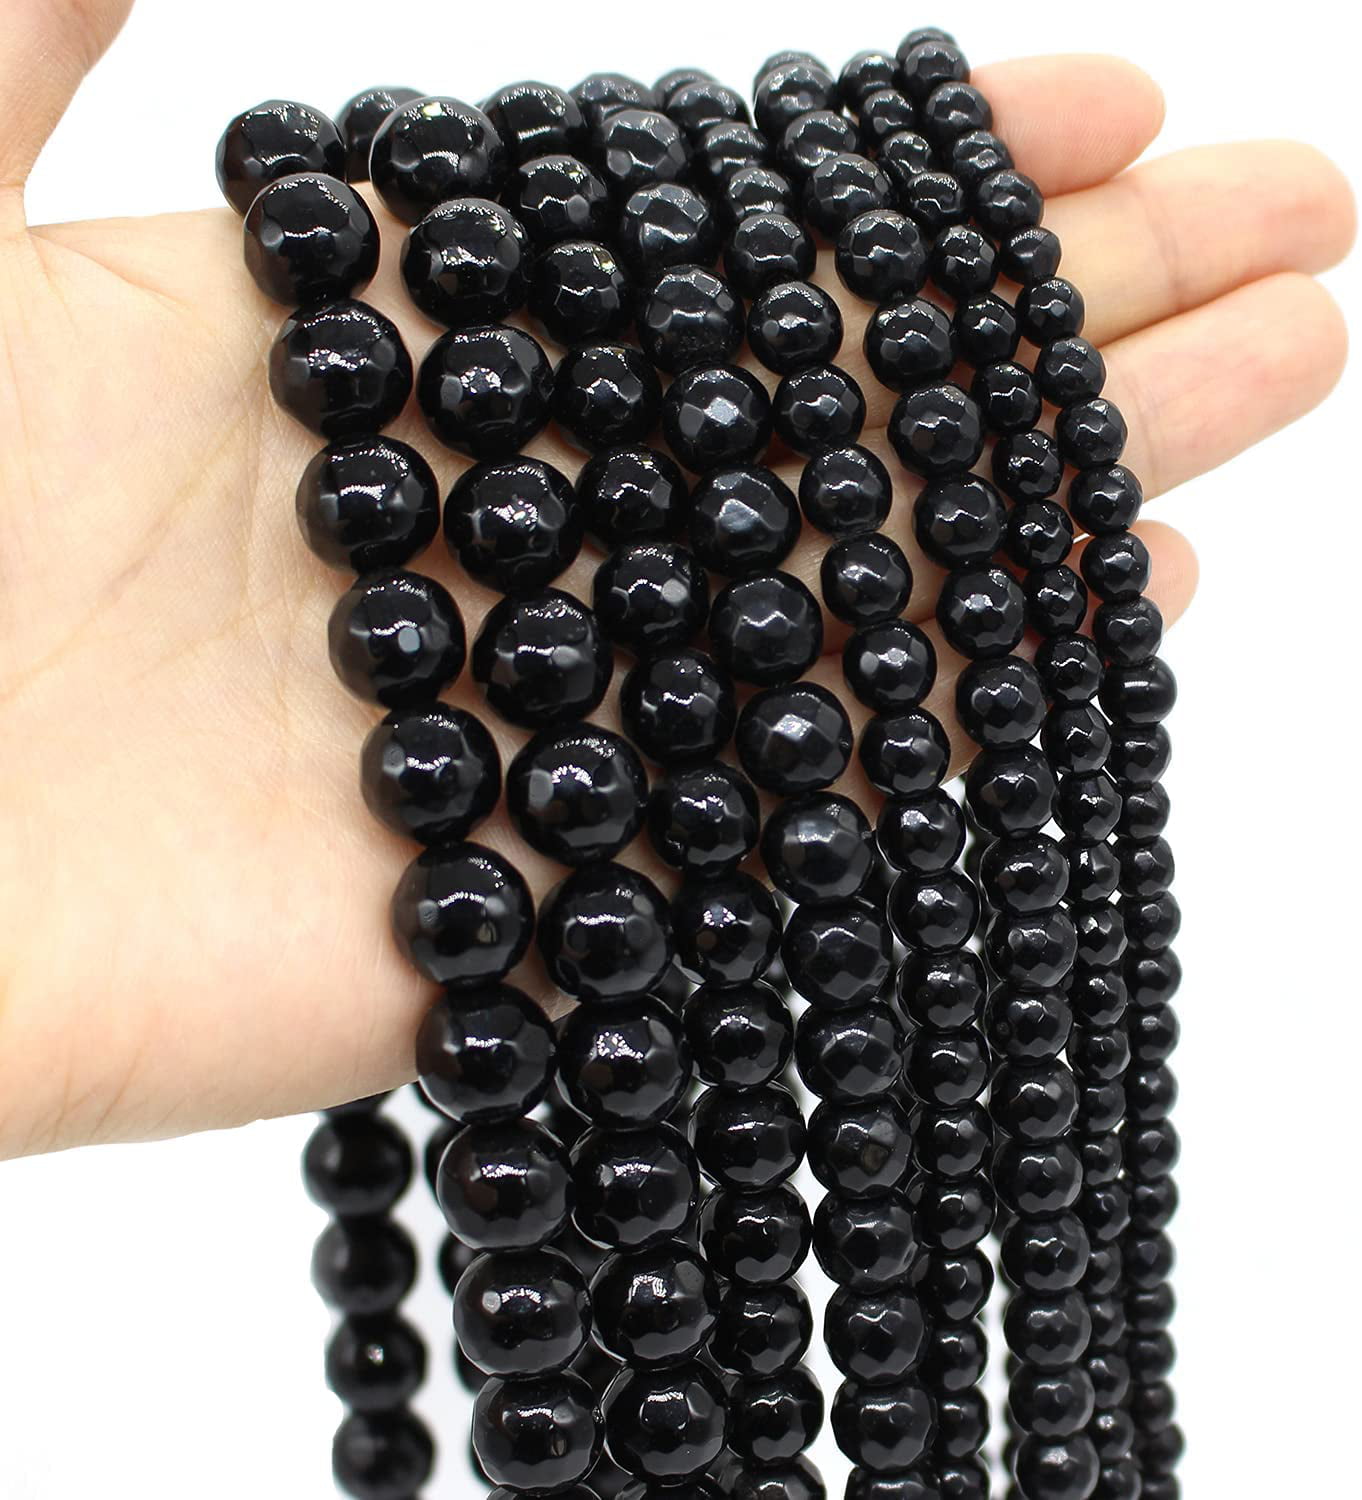 Black Banded Agate Beads 4.5 Inch Unique Jewelry